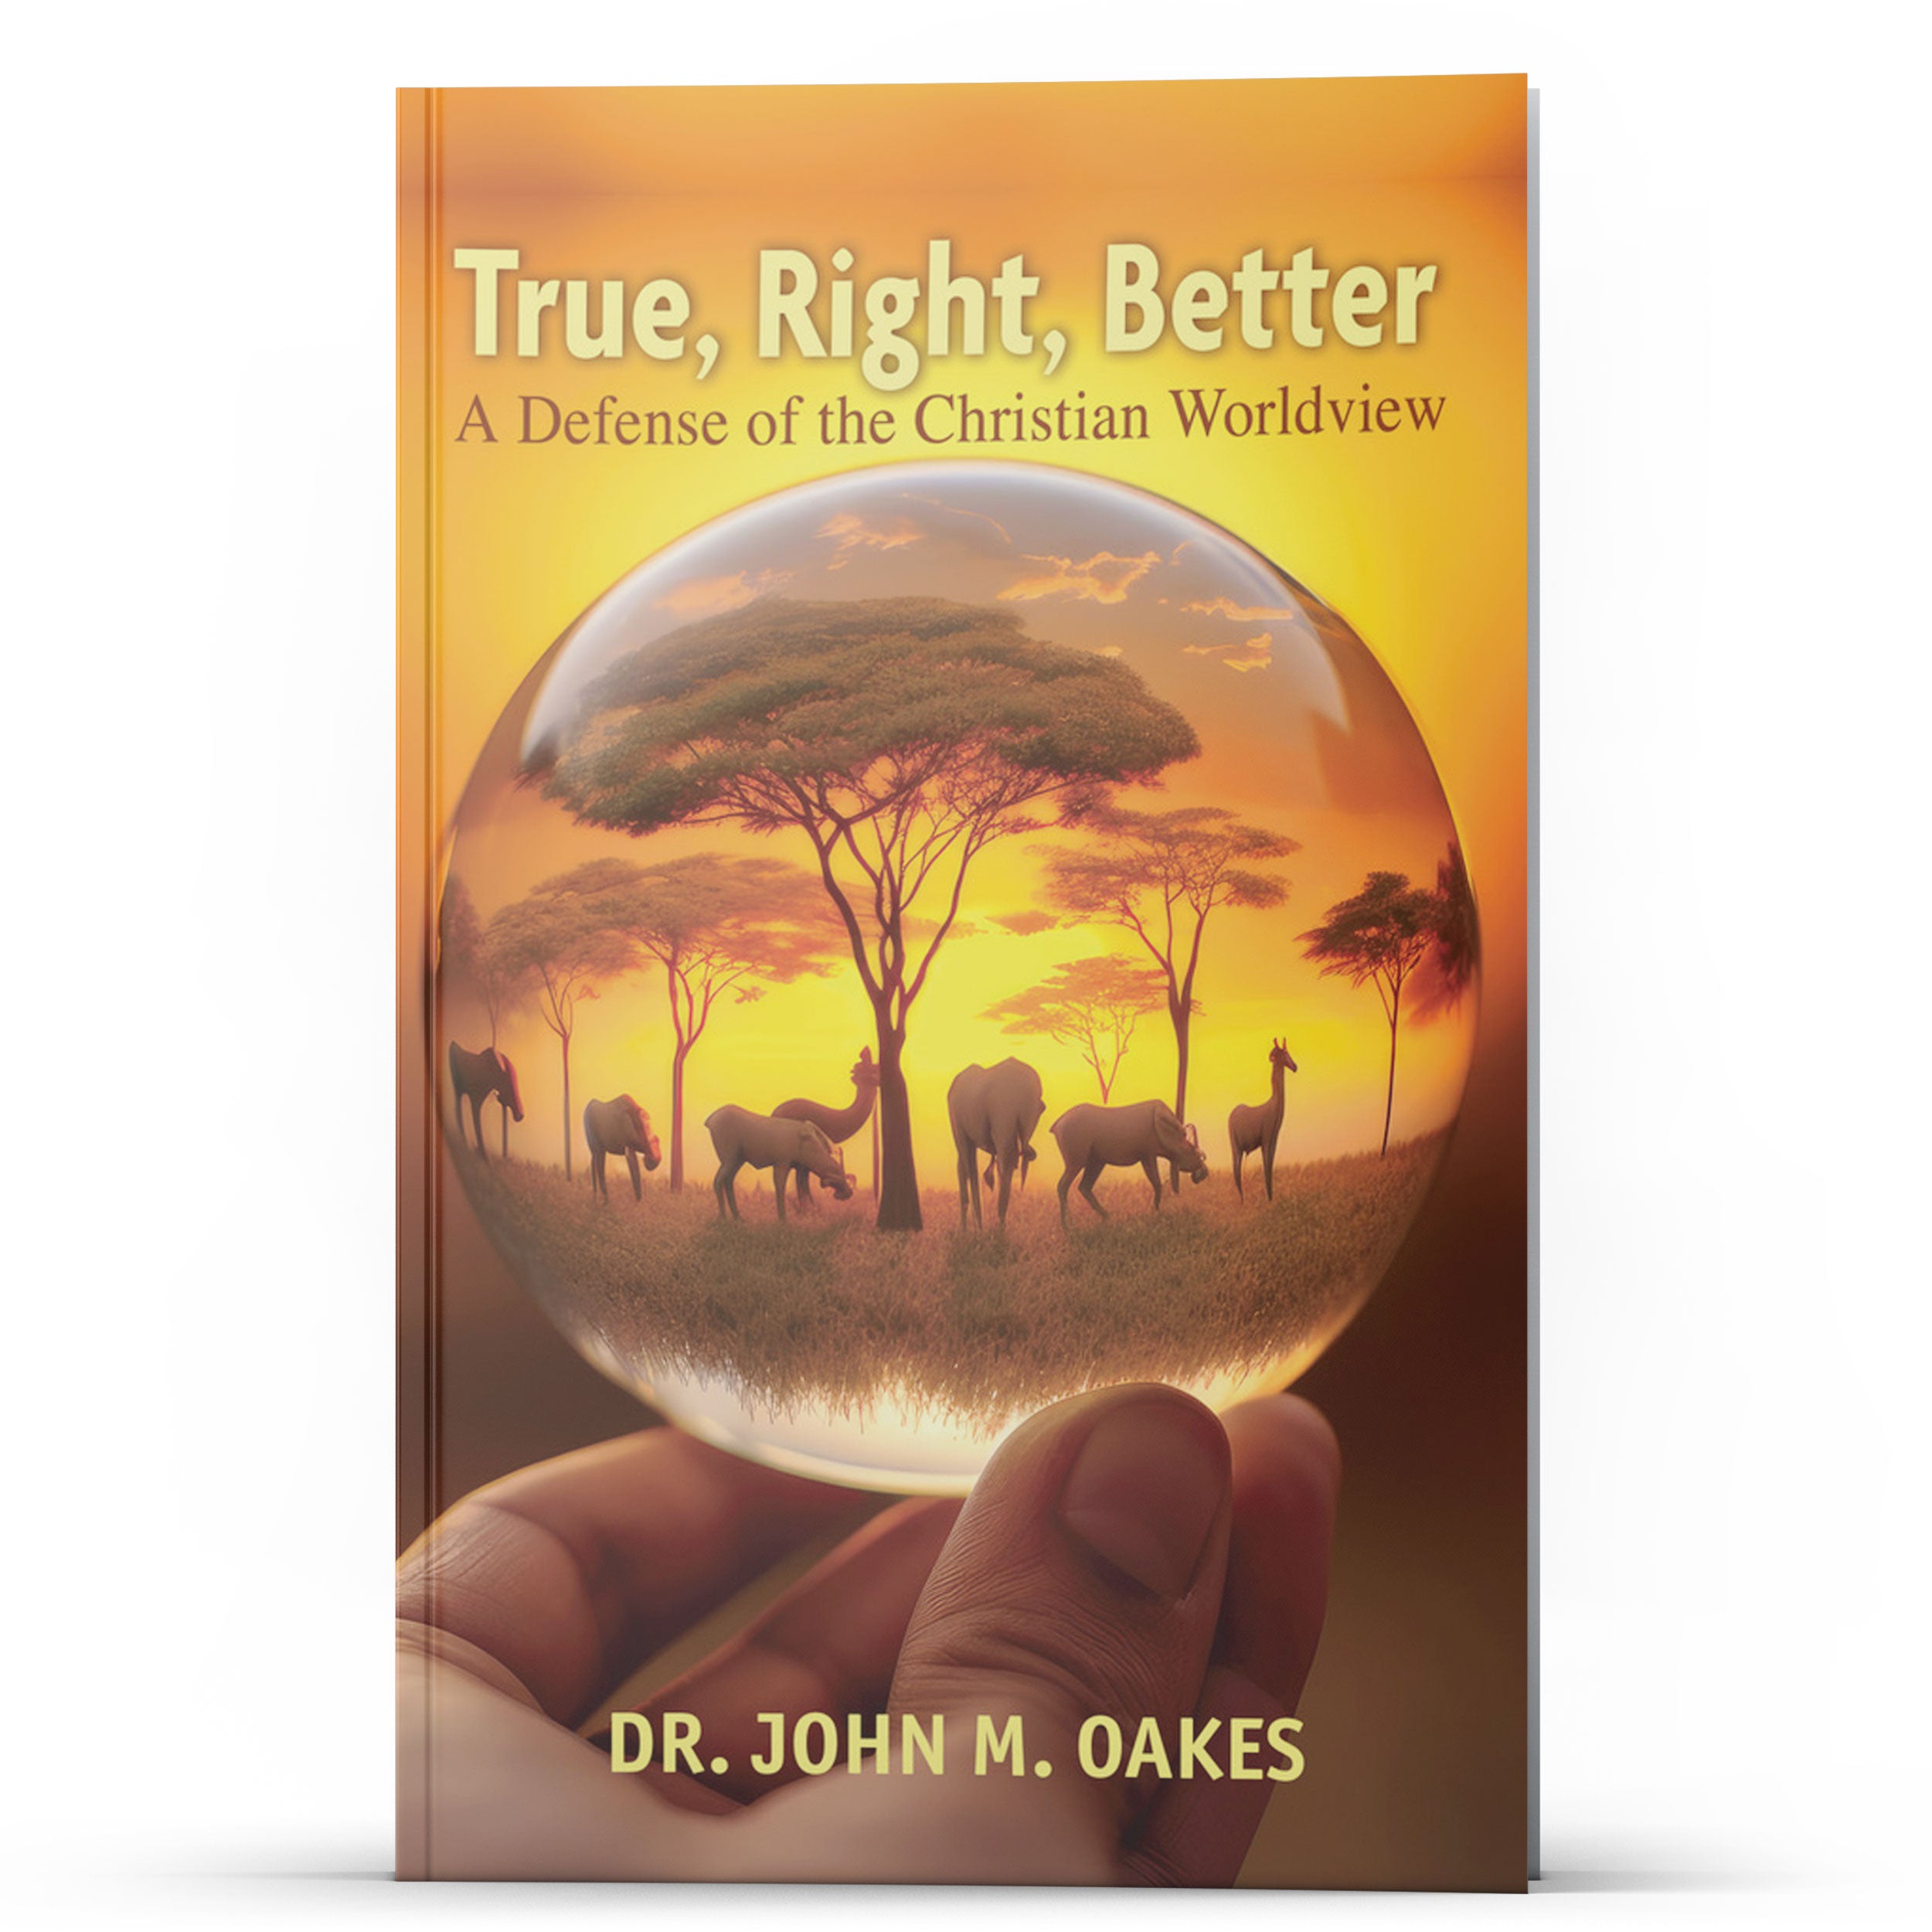 True, Right, Better: A Defense of the Christian Worldview